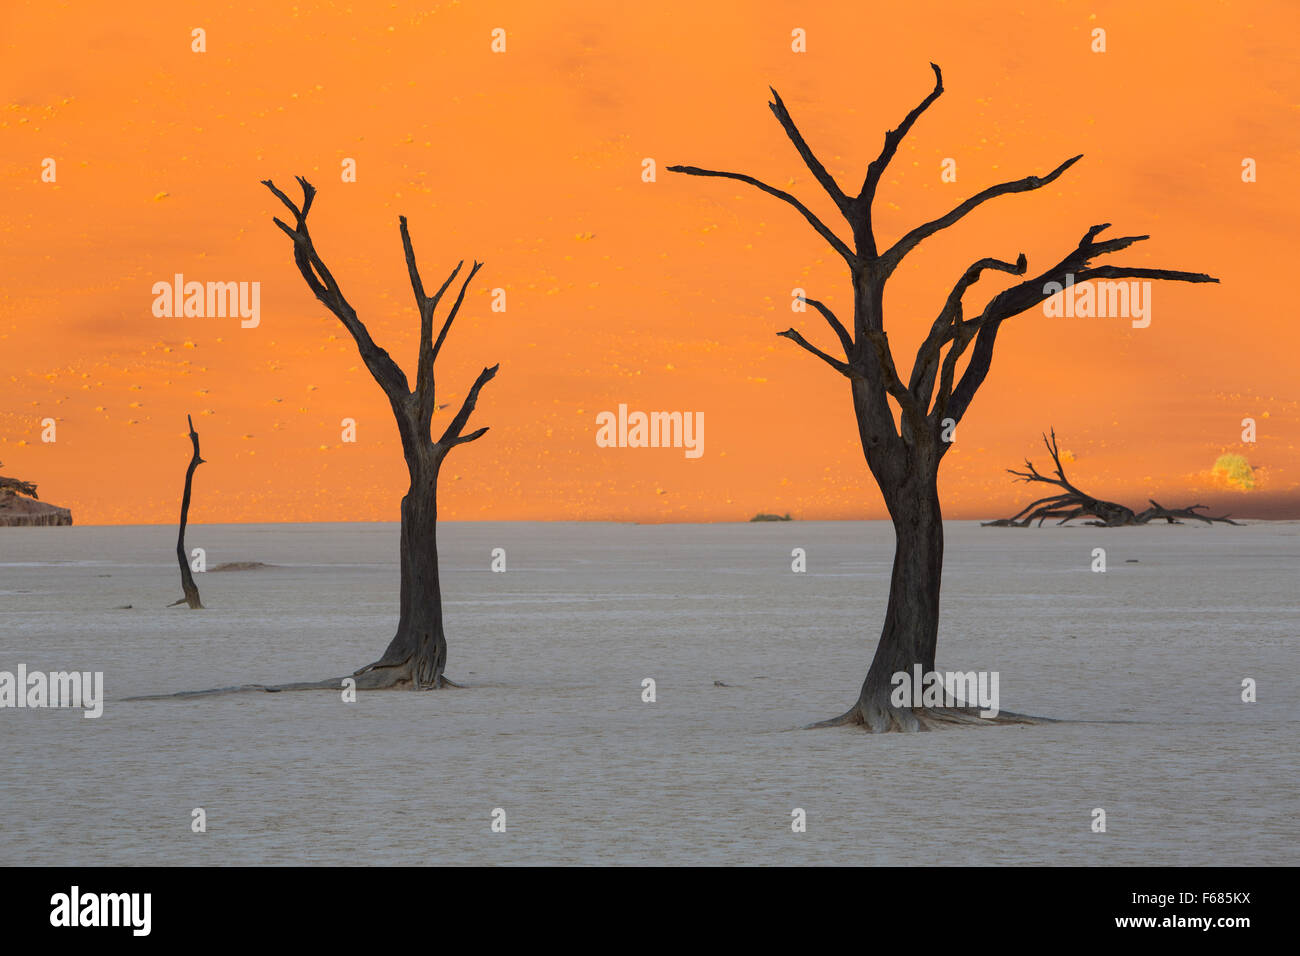 Desiccated camel-thorn trees in Deadvlei at sunrise, Namibia, Africa Stock Photo